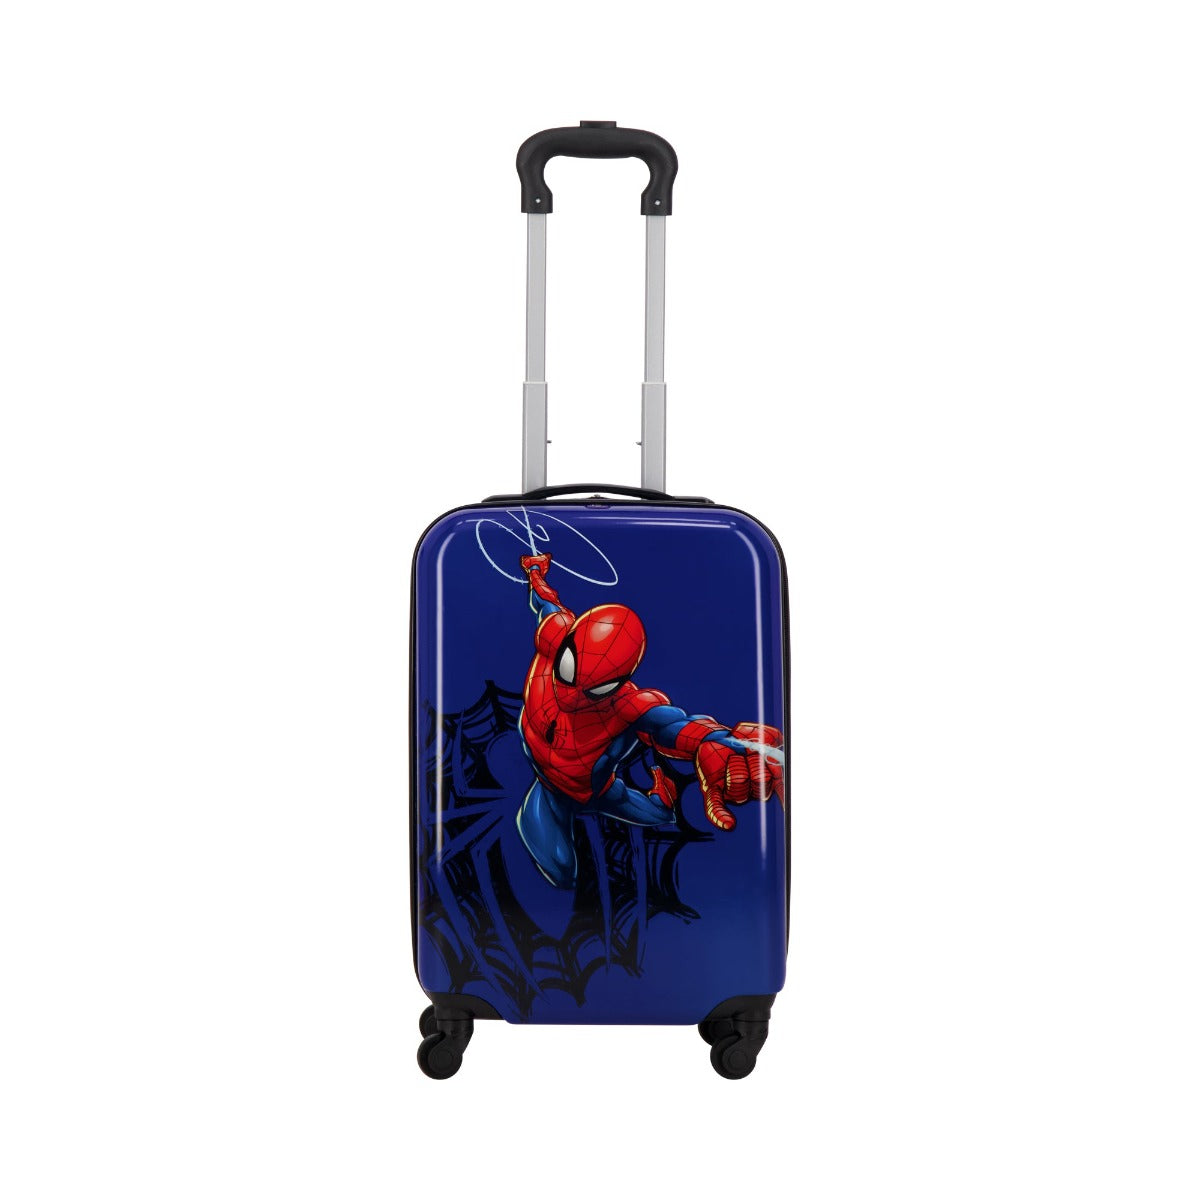 Blue Ful Marvel Spiderman Web matching 2 piece set - 21 inch carry-on rolling luggage for kids